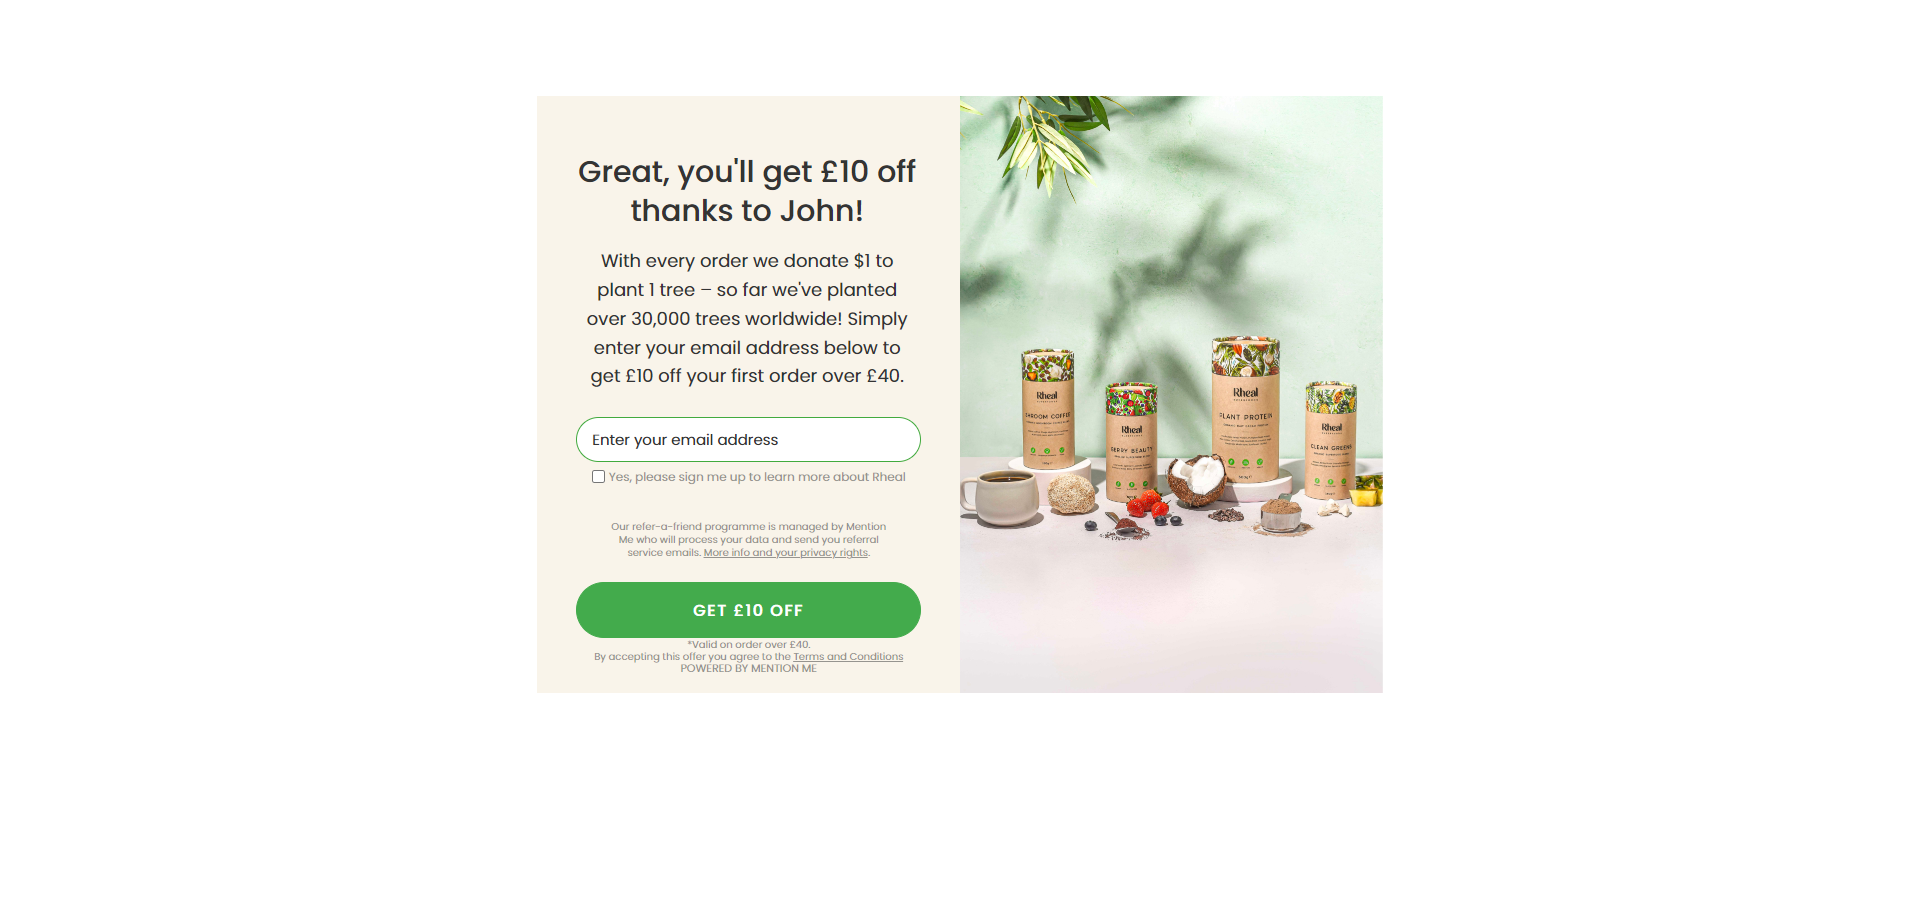 Referral Landing Page for Rheal Superfoods